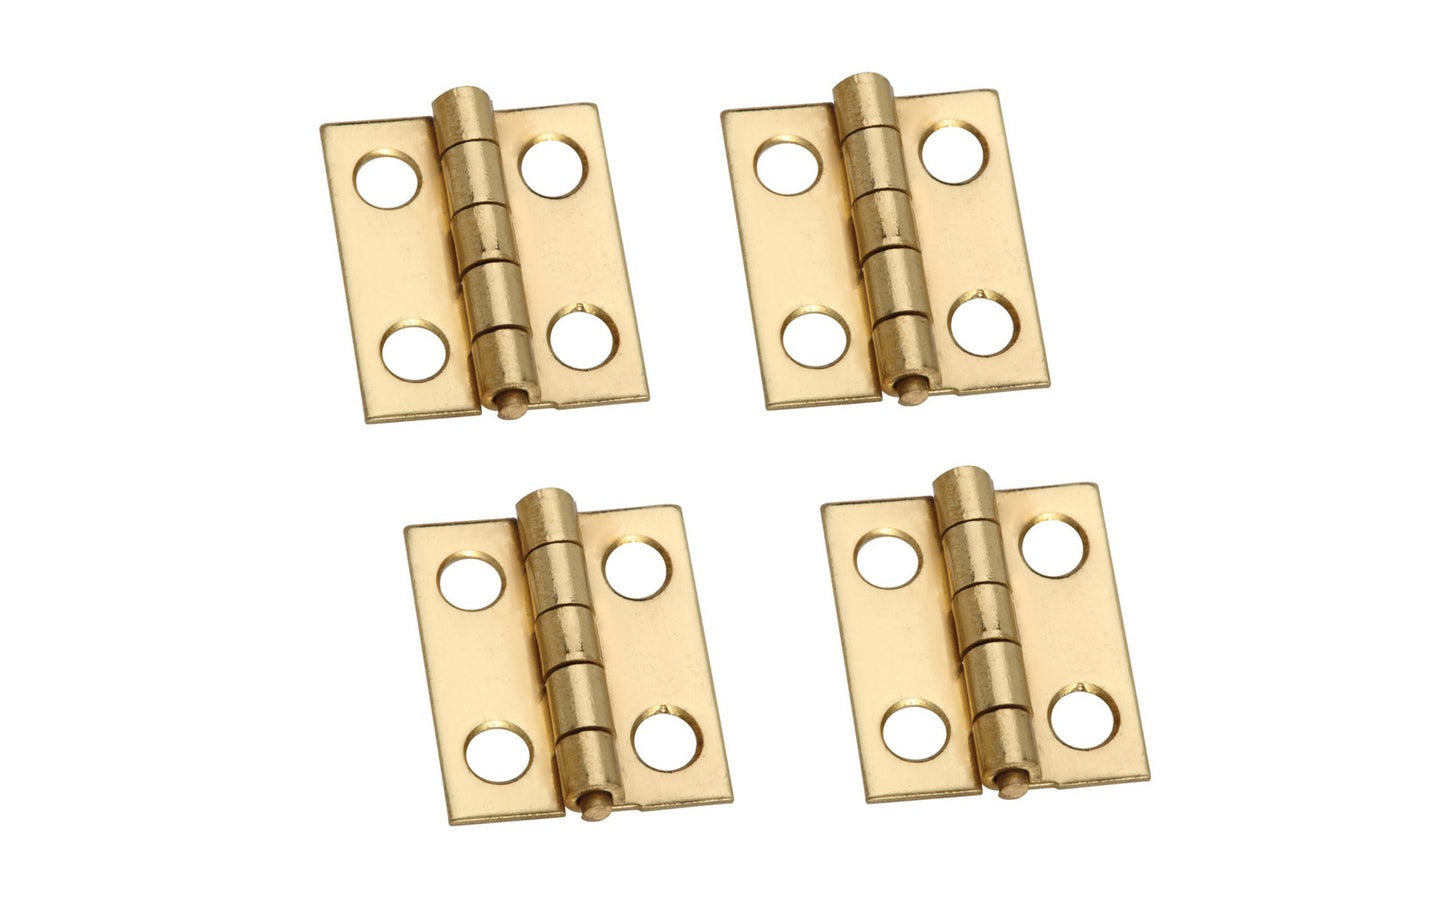 These miniature hinges are designed to add a decorative appearance to small chests, jewelry boxes, craft projects, etc. Made of solid brass material with a lacquered finish. 3/4" high x 5/8" wide. Surface mount. Non-removable pin. Sold as 4 hinges in pack. National Hardware Model No. N211-193. 038613211193. 4 Pack